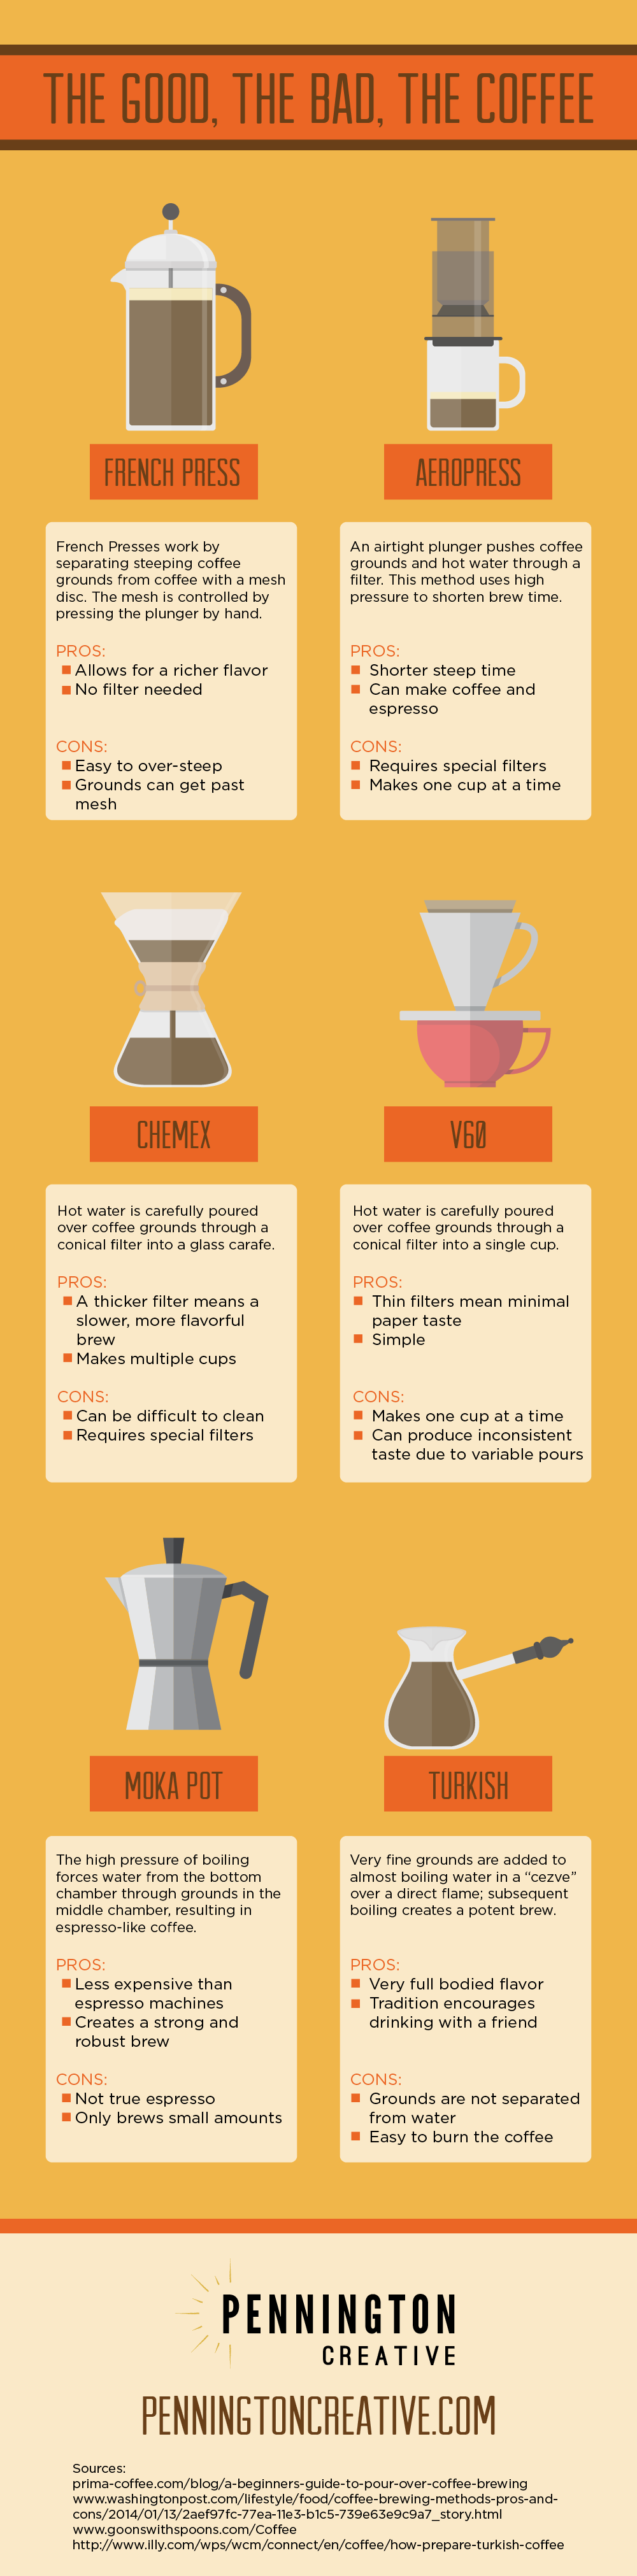 The Good, The Bad, The Coffee Infographic